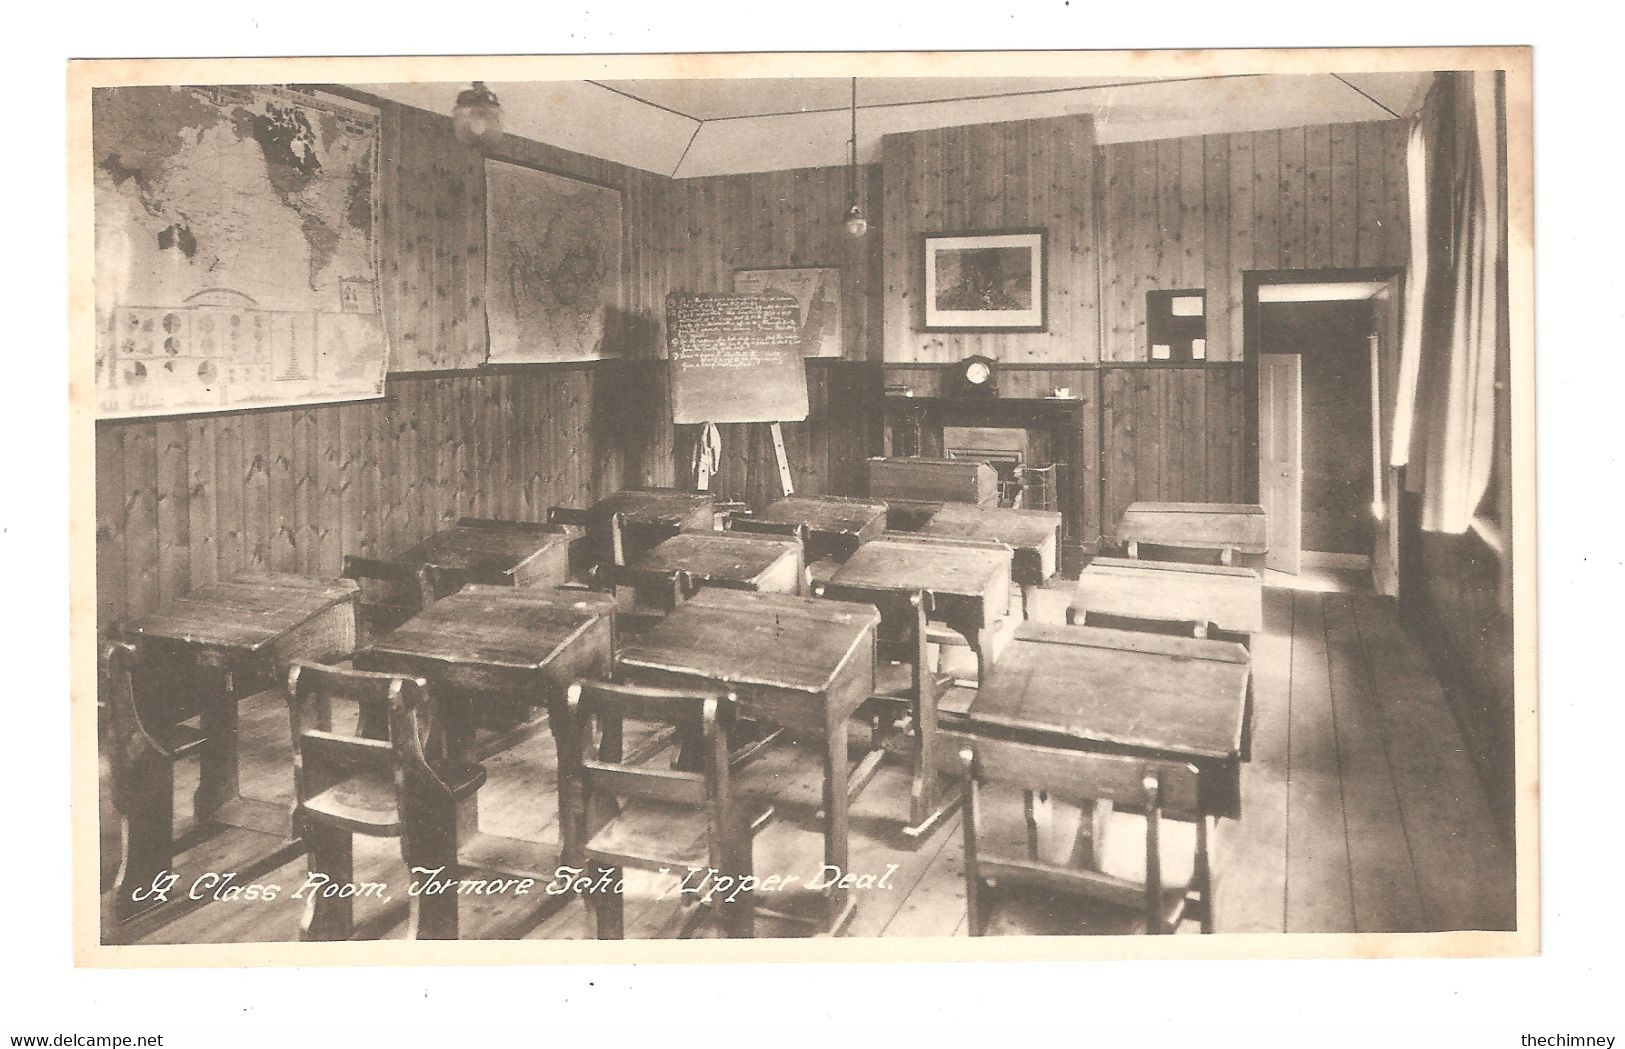 Map On The Left Wall A CLASS ROOM TORMORE SCHOOL UPPER DEAL WALMER KENT UNUSED MARSHALL KEENE & CO - Maps